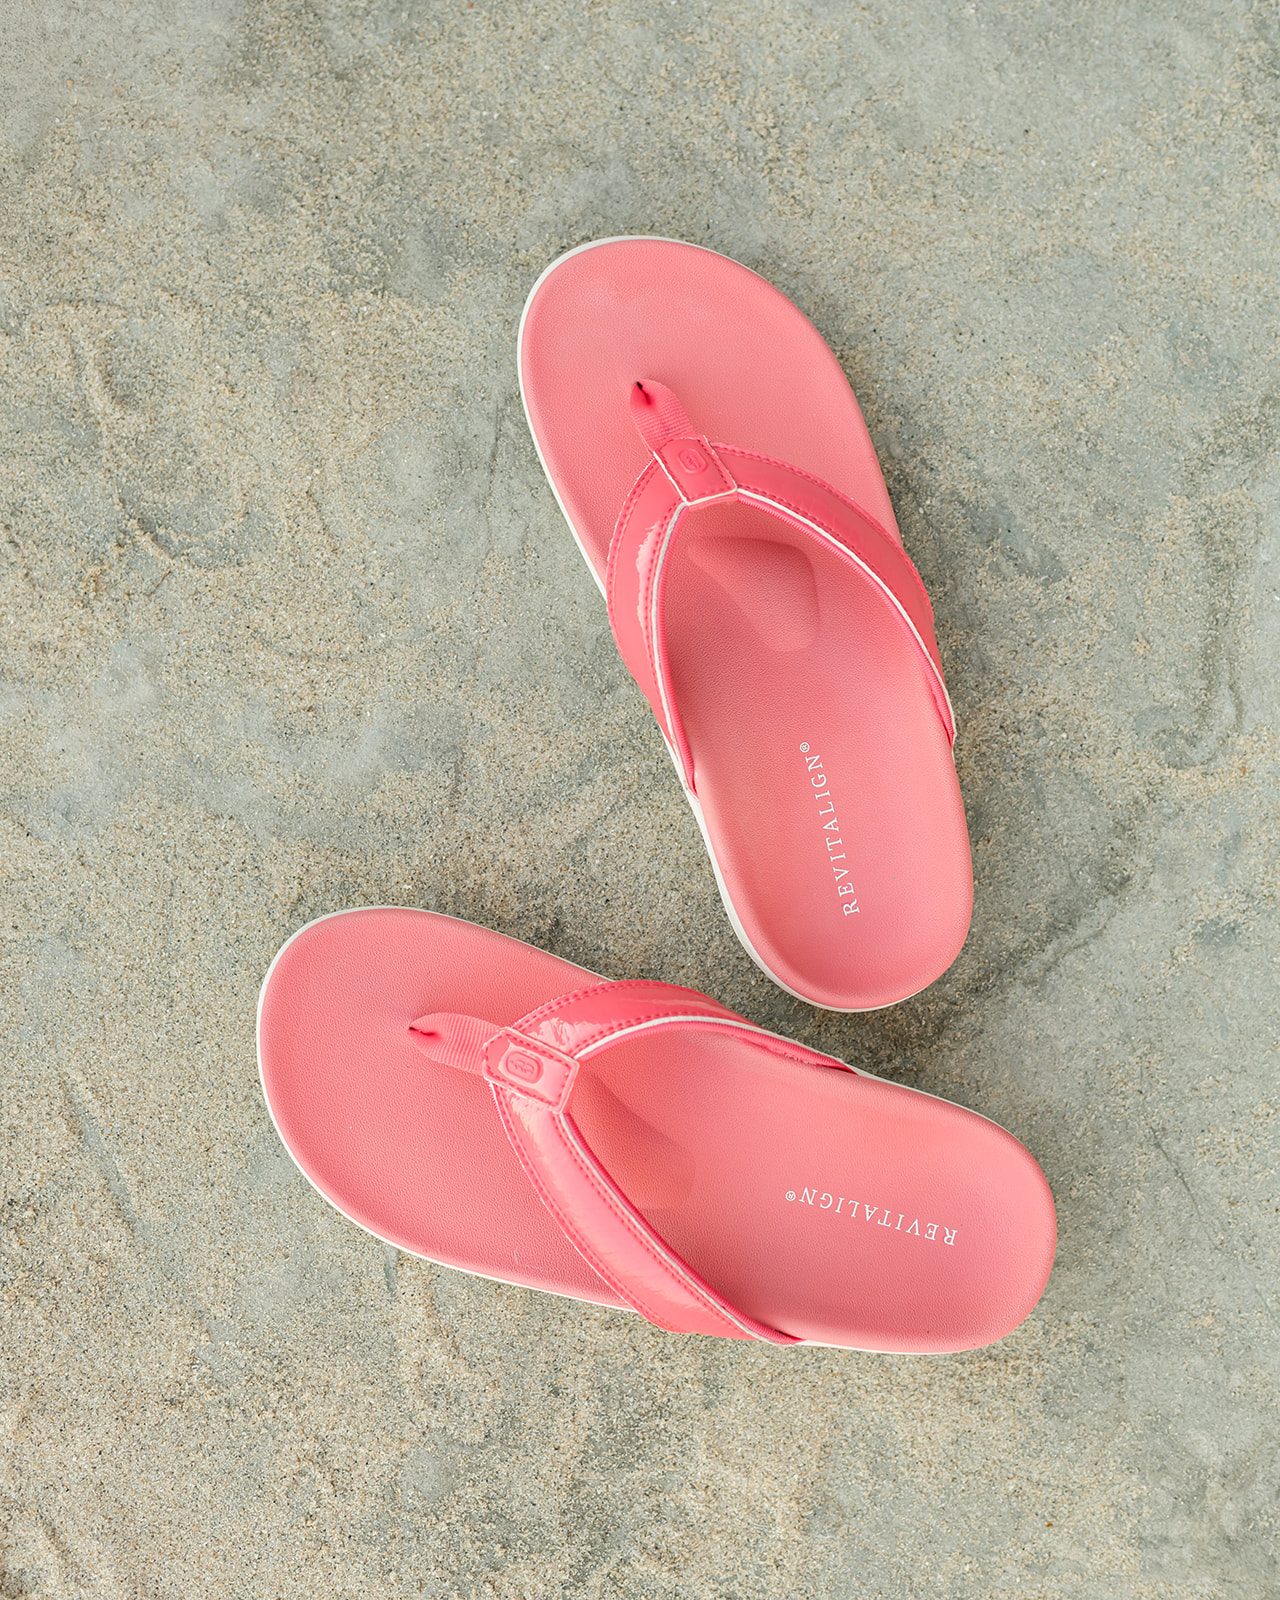 The Yumi™ features a slide-in style with thong straps and toe posts.